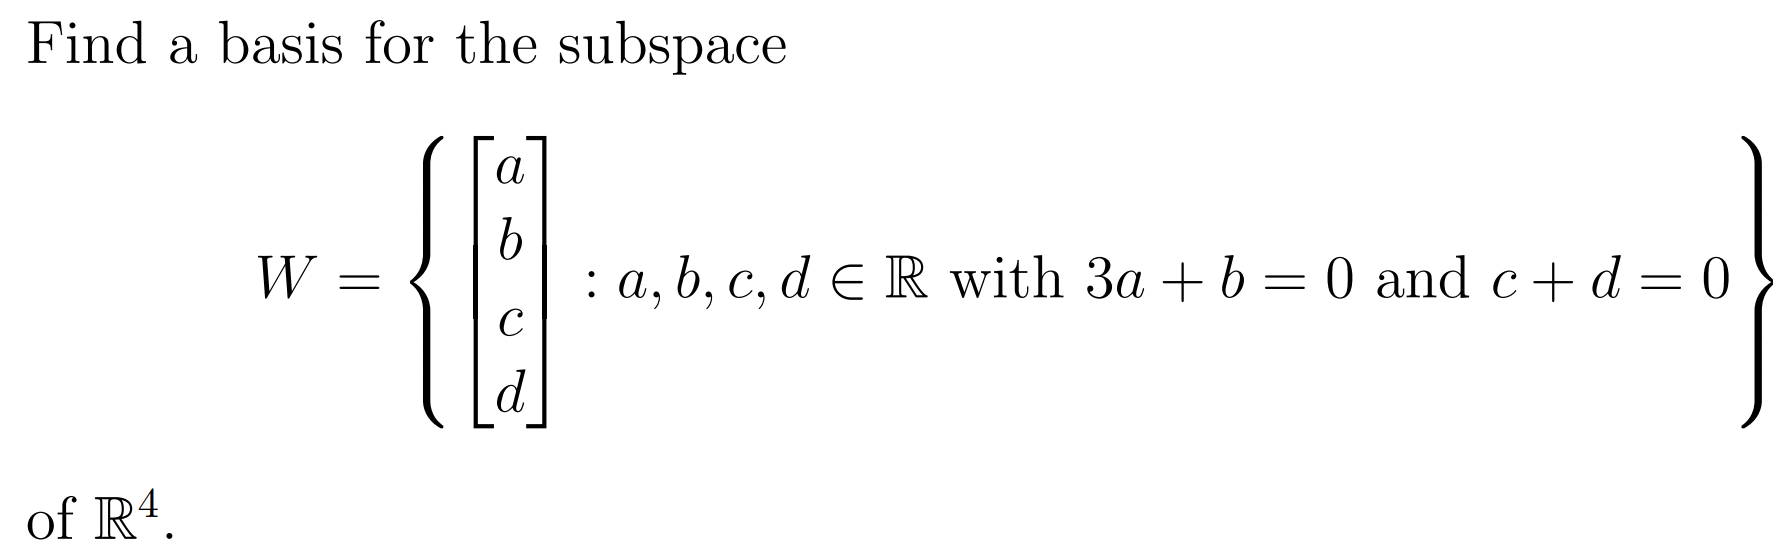 Find a basis for the subspace
а
: a, b, c, d E R with 3a + b=0 and c+ d = 0
C
W =
6.
6.
d
of R4.
